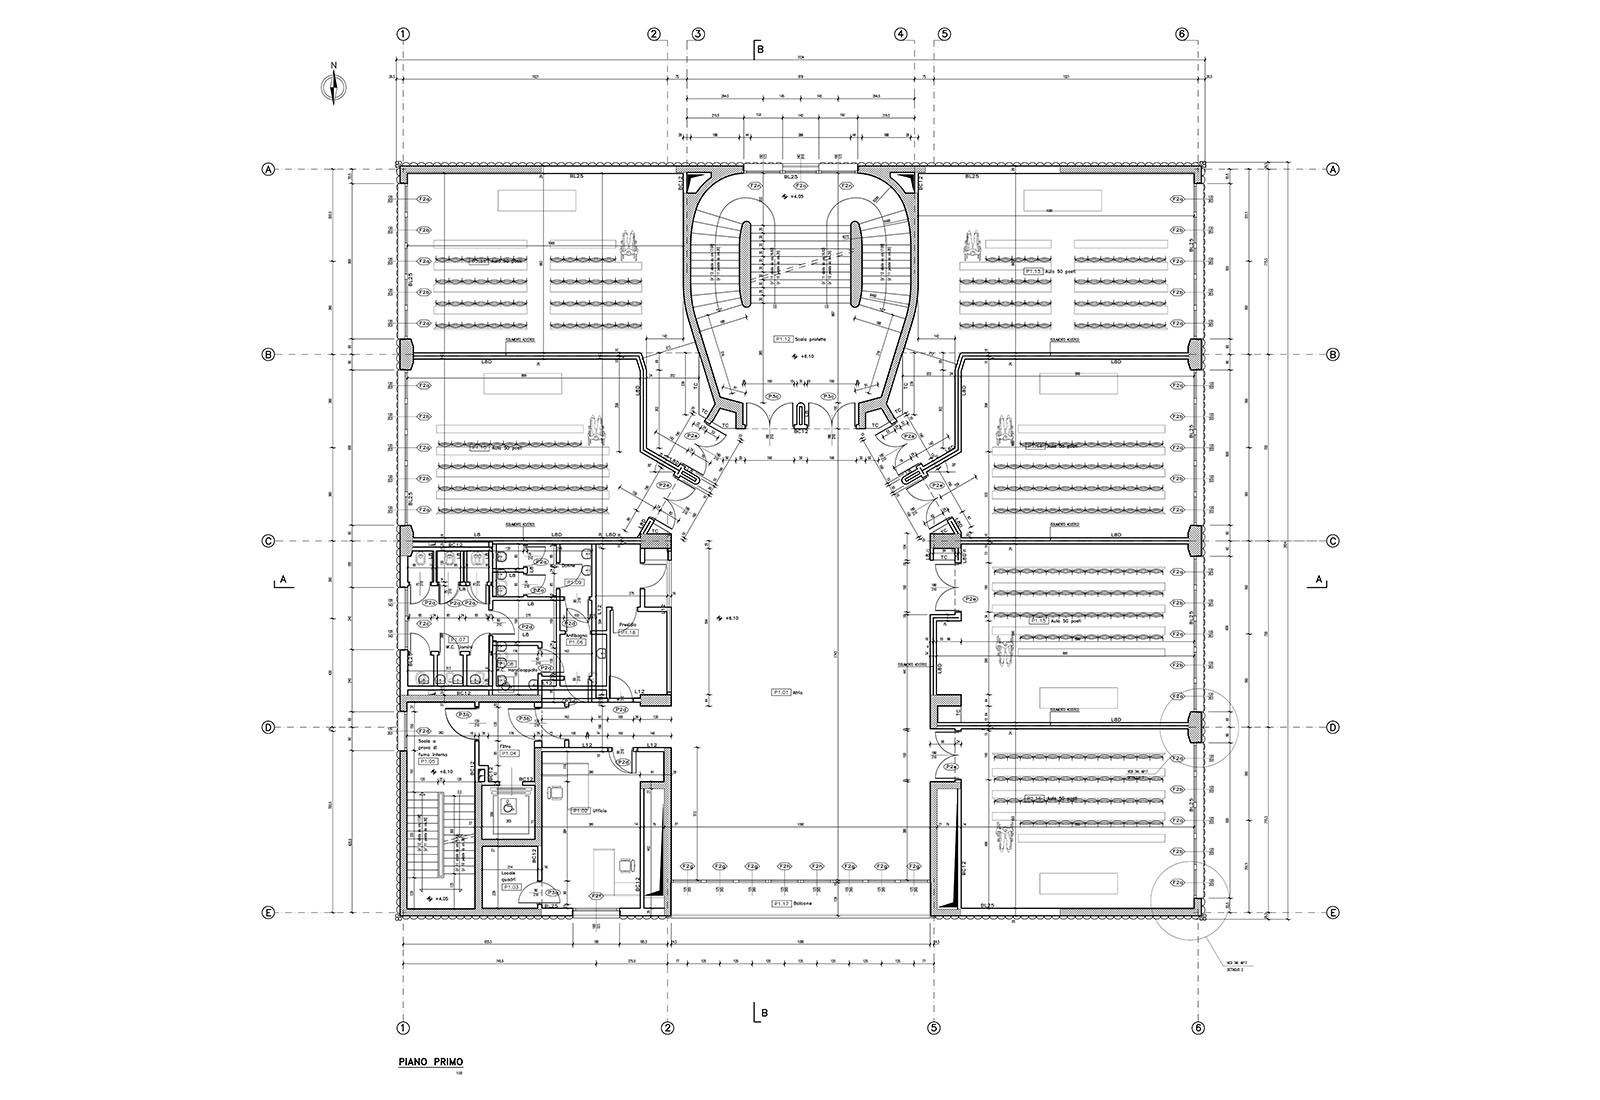 Building 25 Politecnico di Milano - First floor plan furnished